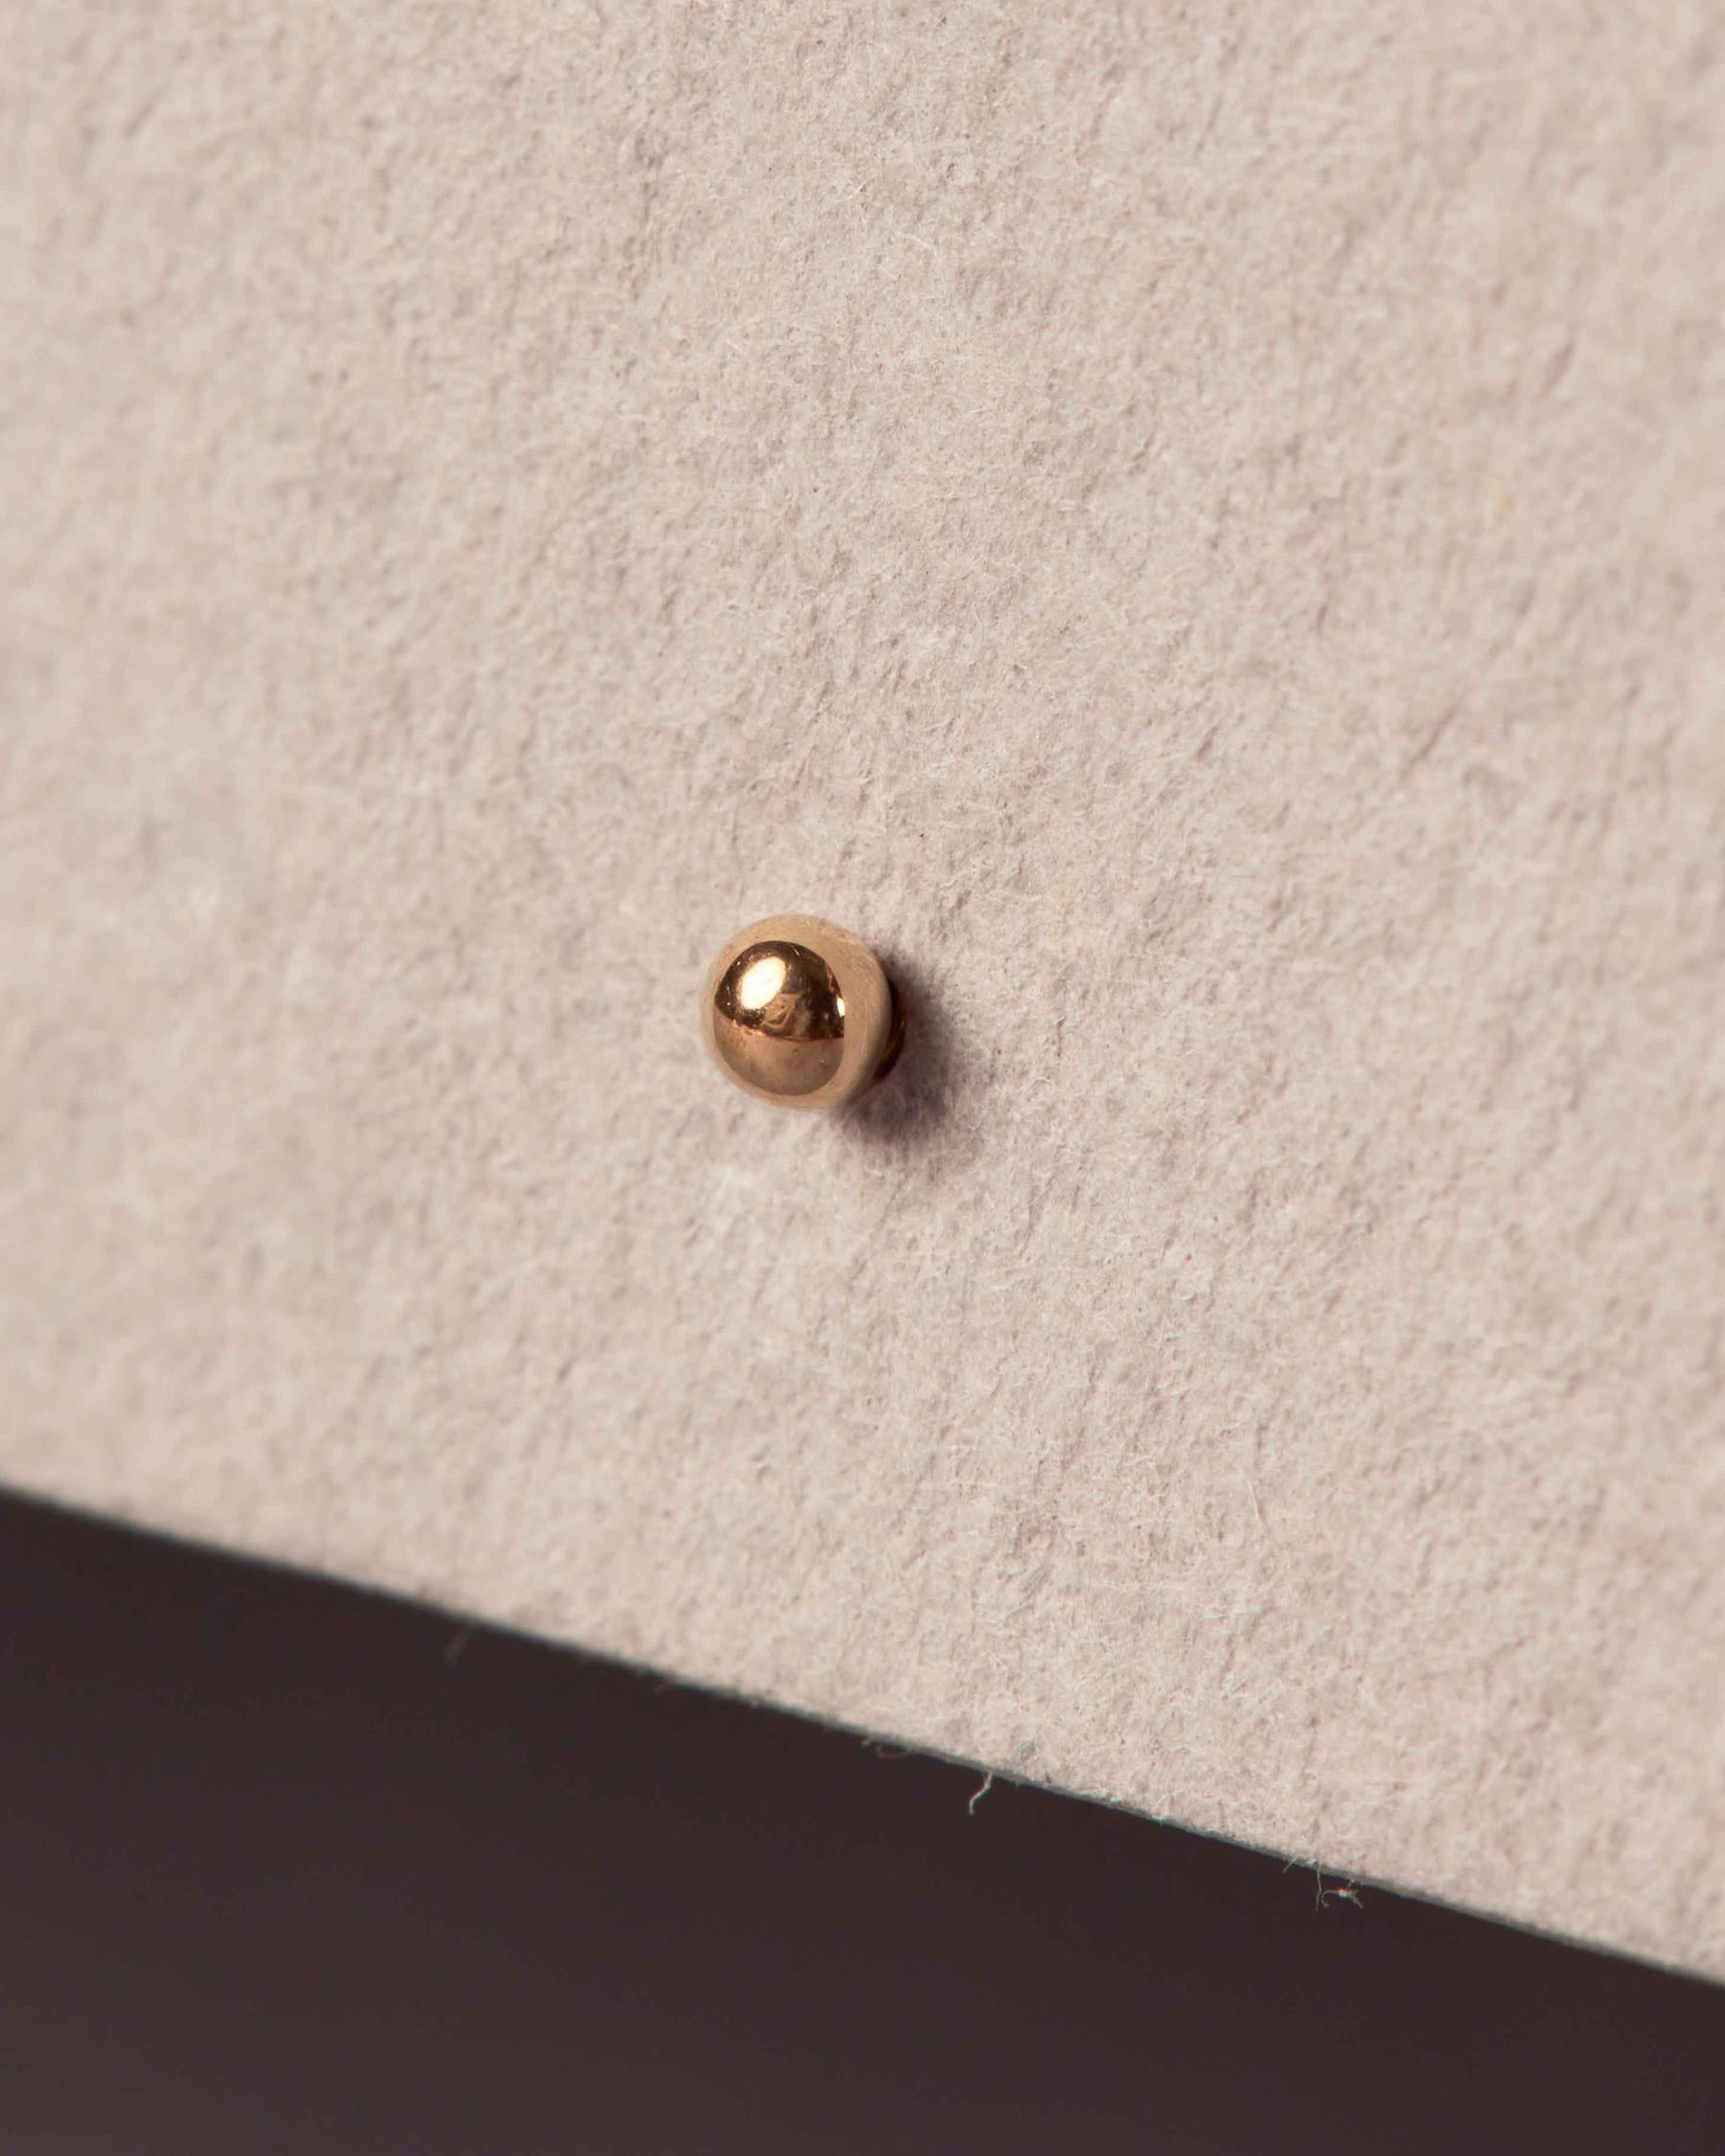 9K Solid Gold Forever Tiny Ball Earring